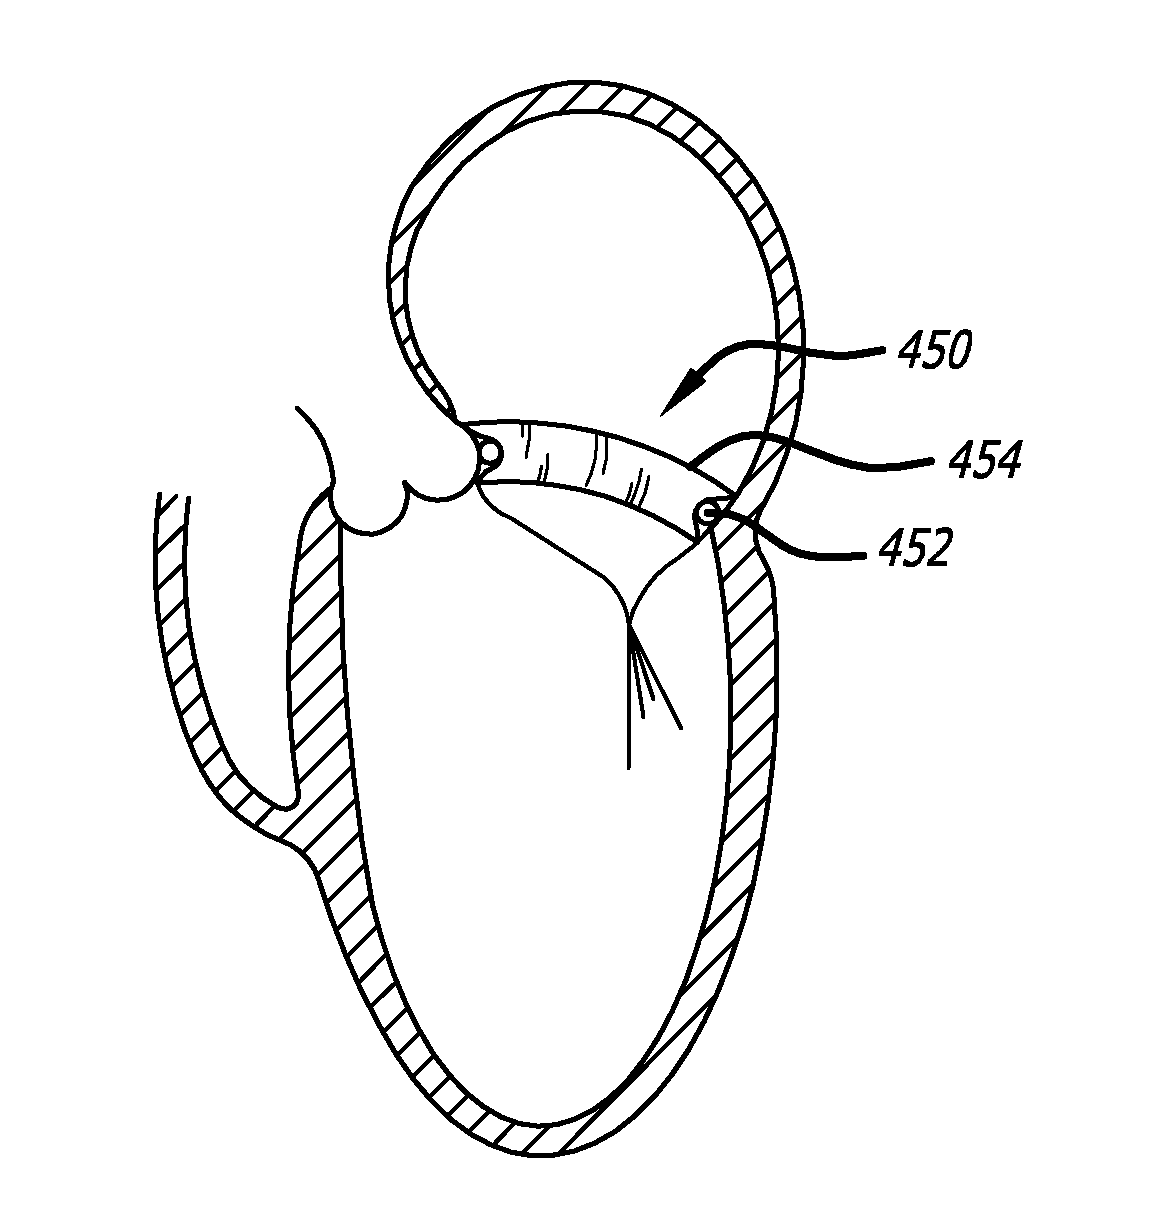 Valve replacement systems and methods